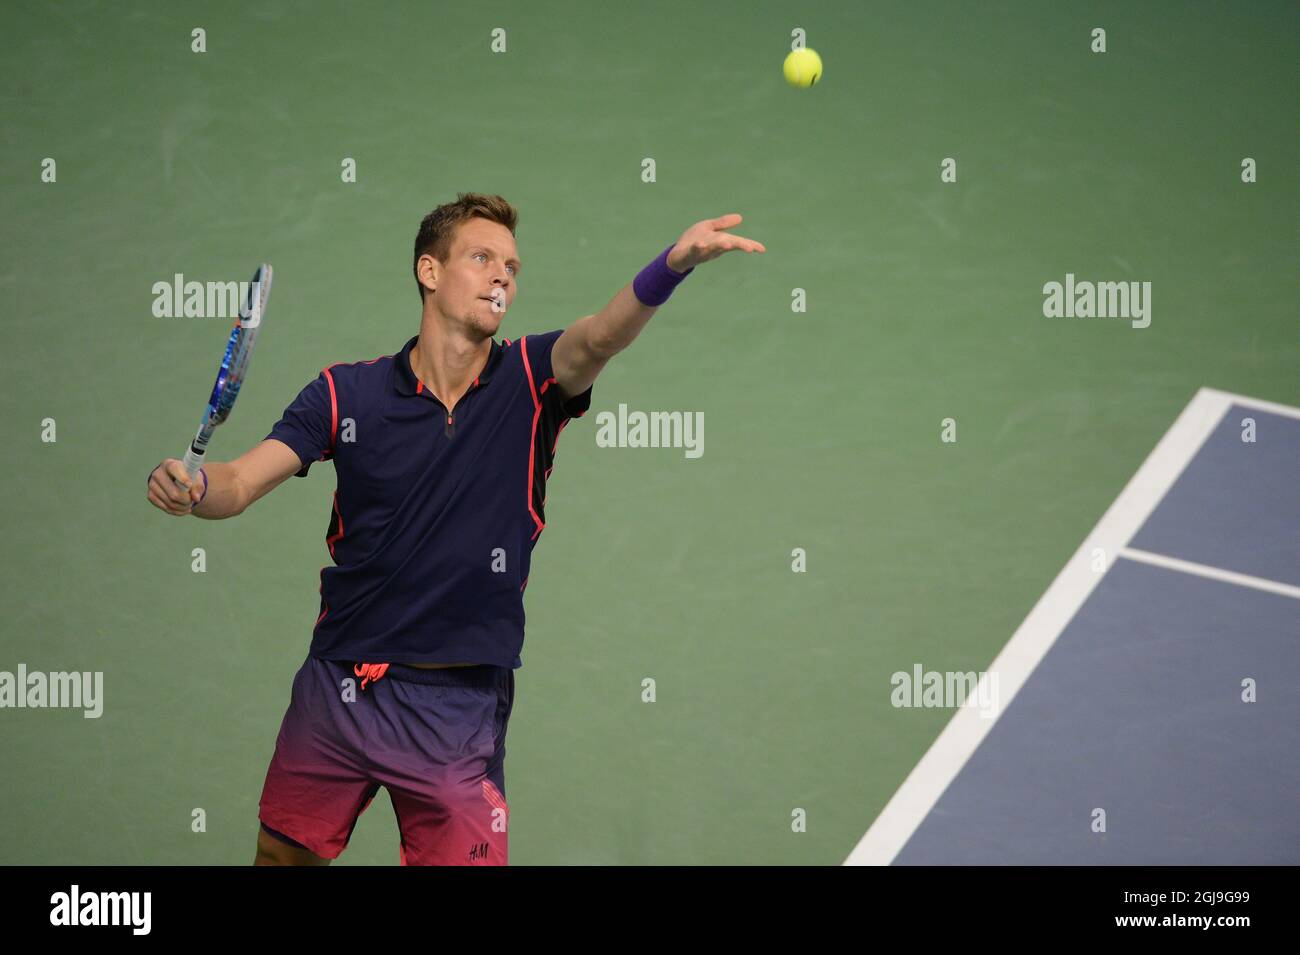 Tomas Berdych, of Czech Republic serv to Jack Sock, of US during the Stockholm Open final Sunday Oct. 25, 2015. Foto: Anders Wiklund / TT / Kod 10040 Stock Photo